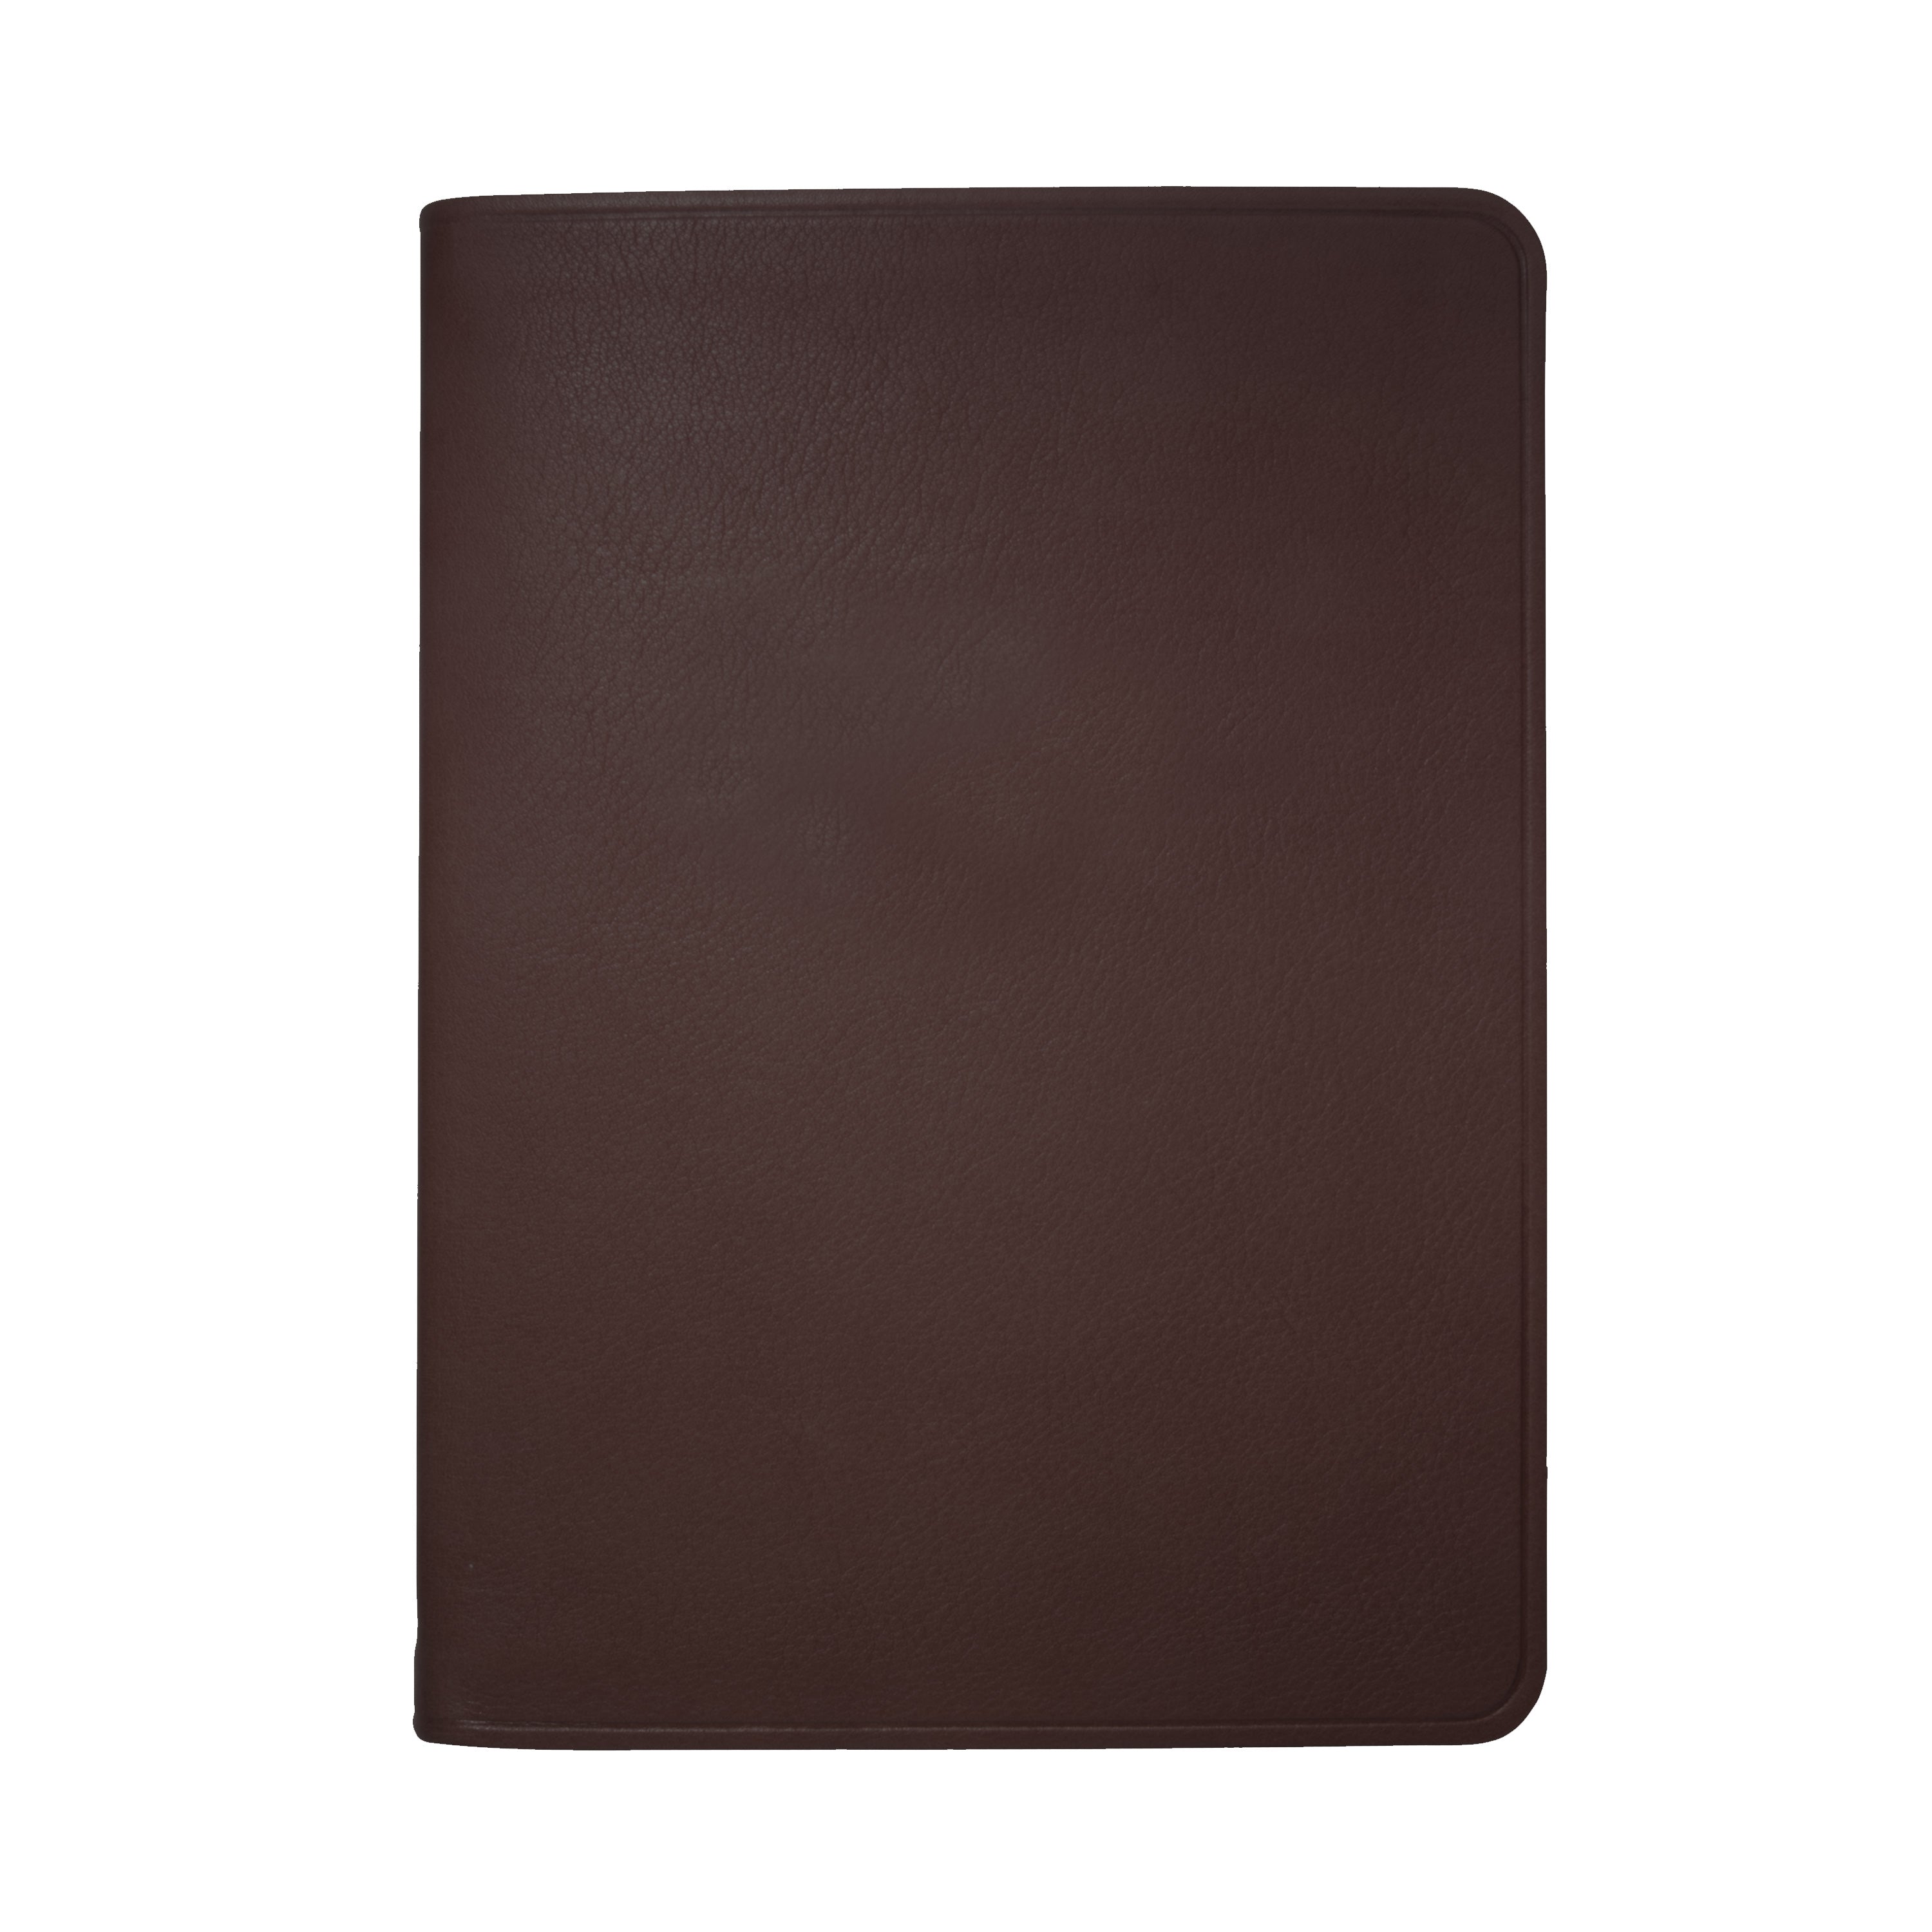 Graphic Image 7 X 5 Medium Travel Journal Brown Traditional Leather